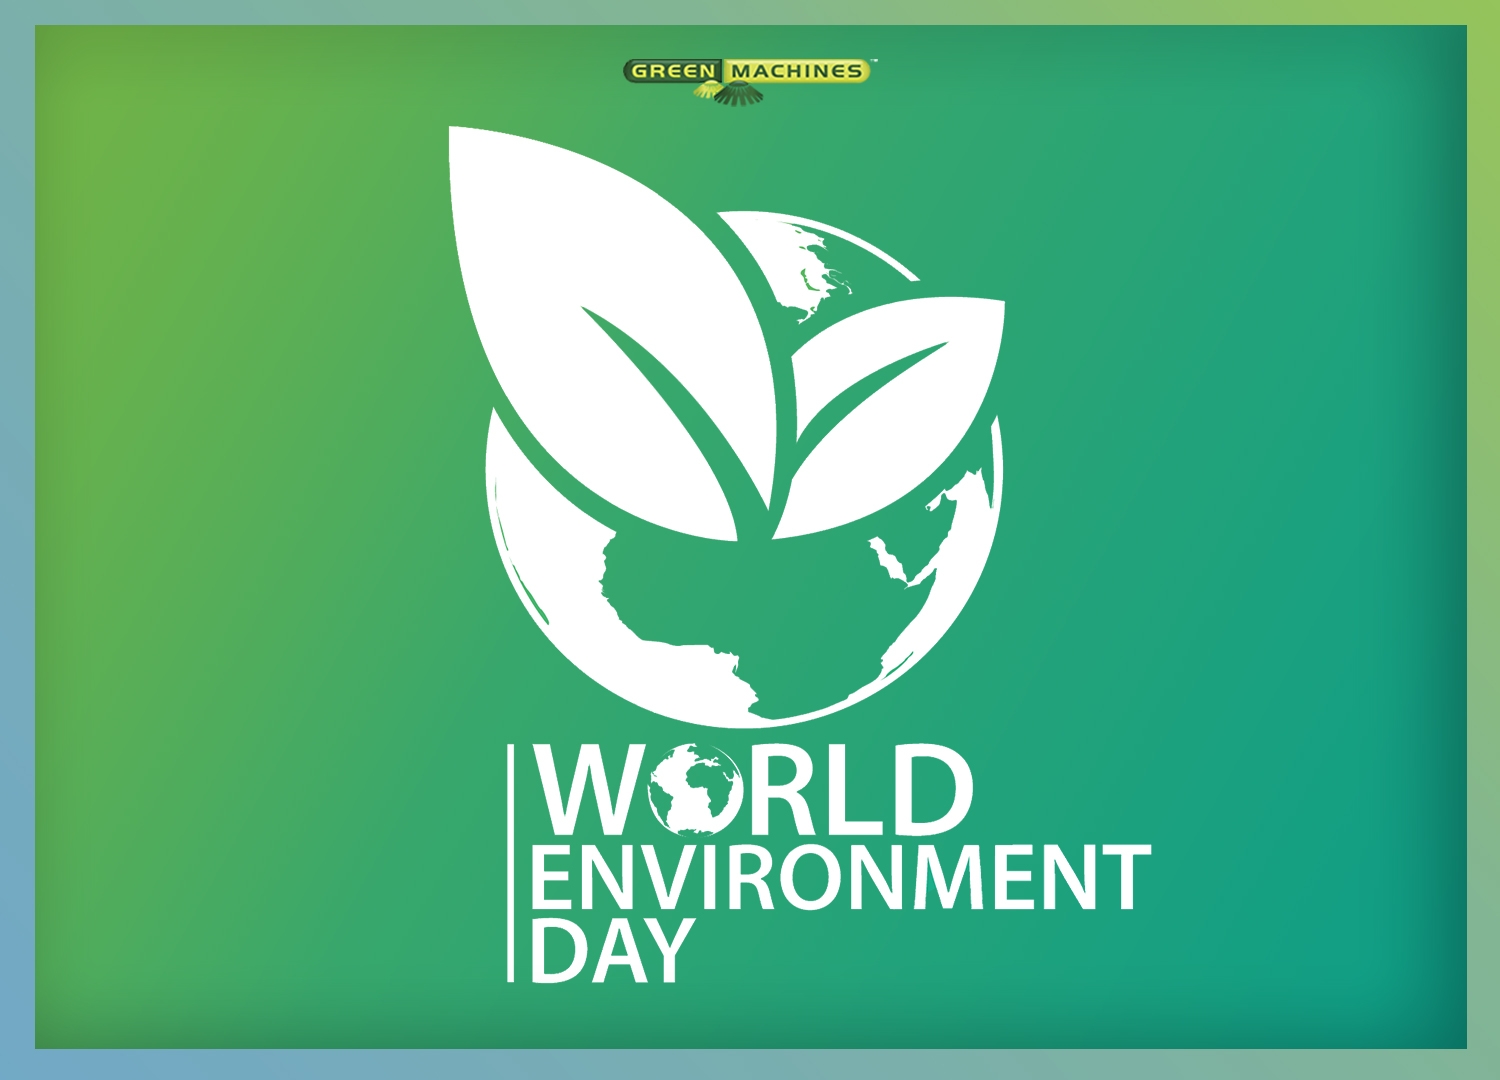 JUNE 5TH - WORLD ENVIRONMENT DAY